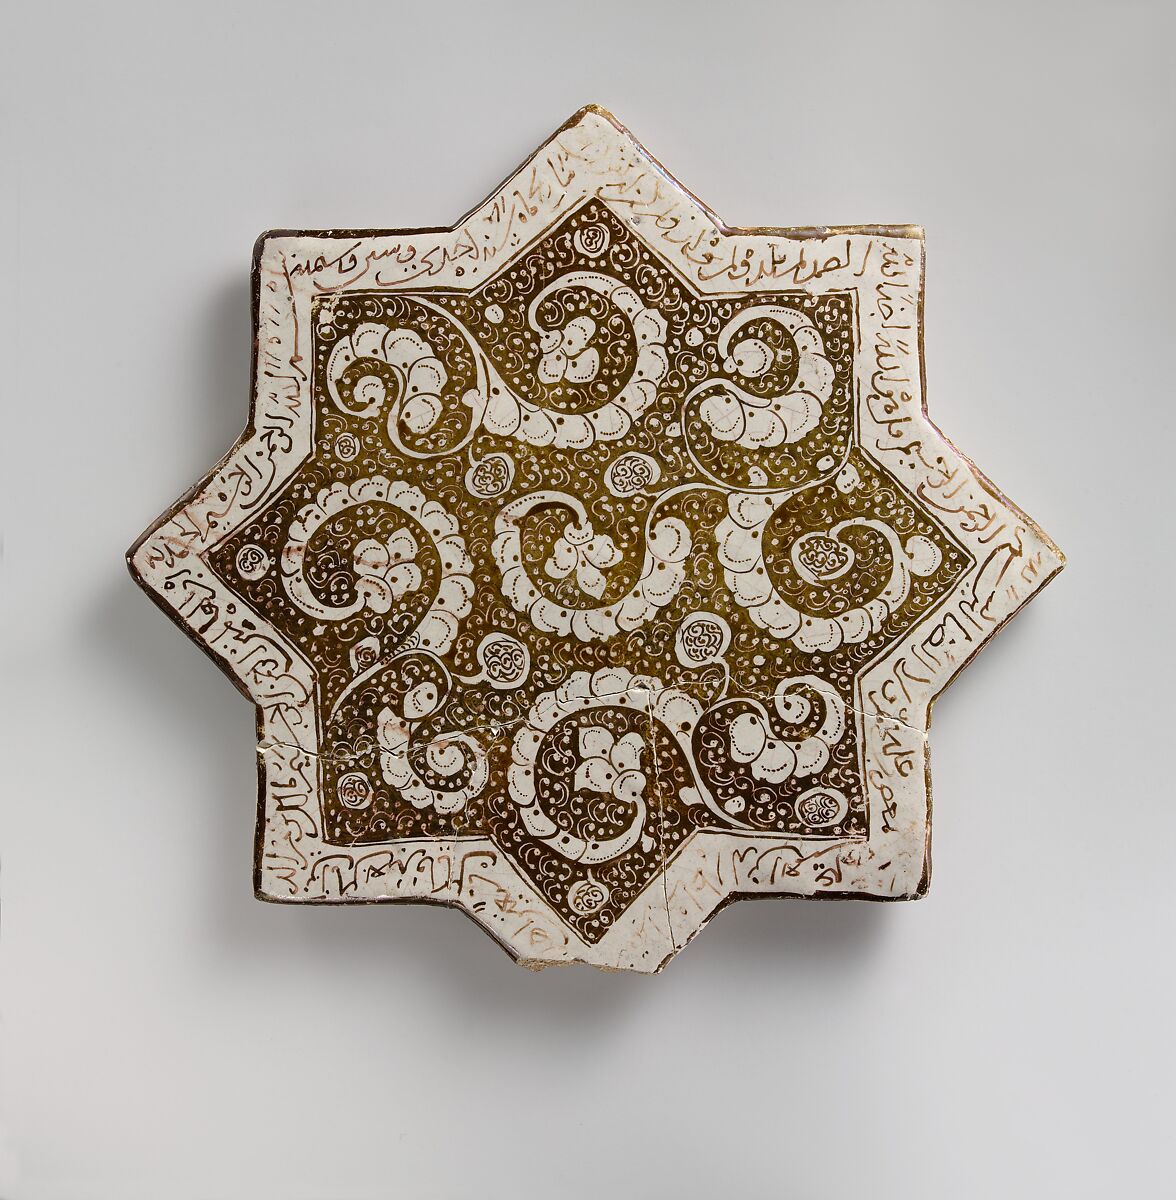 Star-Shaped Tile, Stonepaste; luster-painted on opaque white glaze 